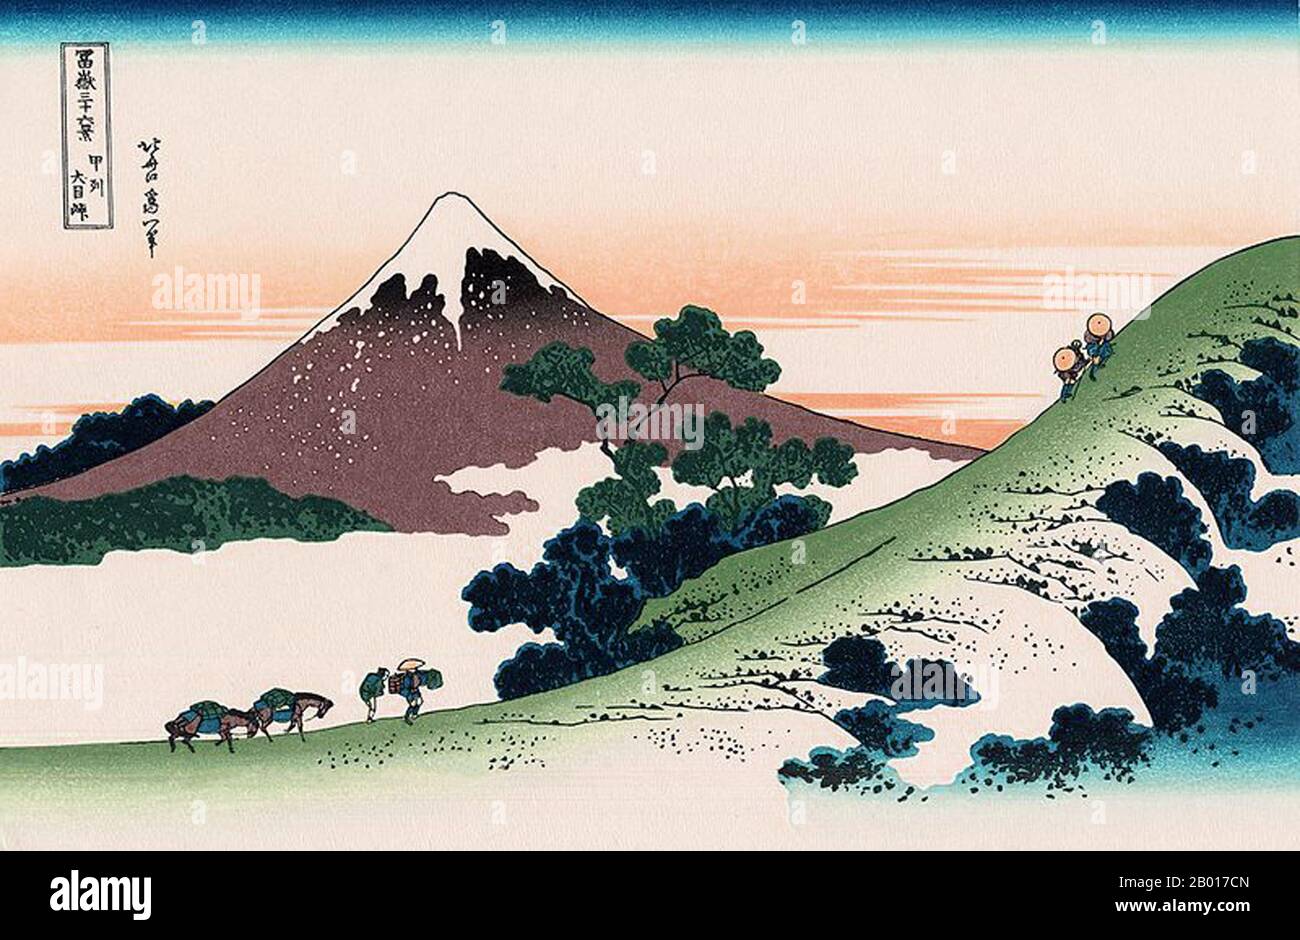 Japan: ‘Inume Pass, Koshu’. Ukiyo-e woodblock print from the series ‘Thirty-Six Views of Mount Fuji’ by Katsushika Hokusai (31 October 1760 - 10 May 1849), 1830.  ‘Thirty-six Views of Mount Fuji’ is an ‘ukiyo-e’ series of woodcut prints by Japanese artist Katsushika Hokusai. The series depicts Mount Fuji in differing seasons and weather conditions from a variety of places and distances. It actually consists of 46 prints created between 1826 and 1833. The first 36 were included in the original publication and, due to their popularity, 10 more were added after the original publication. Stock Photo